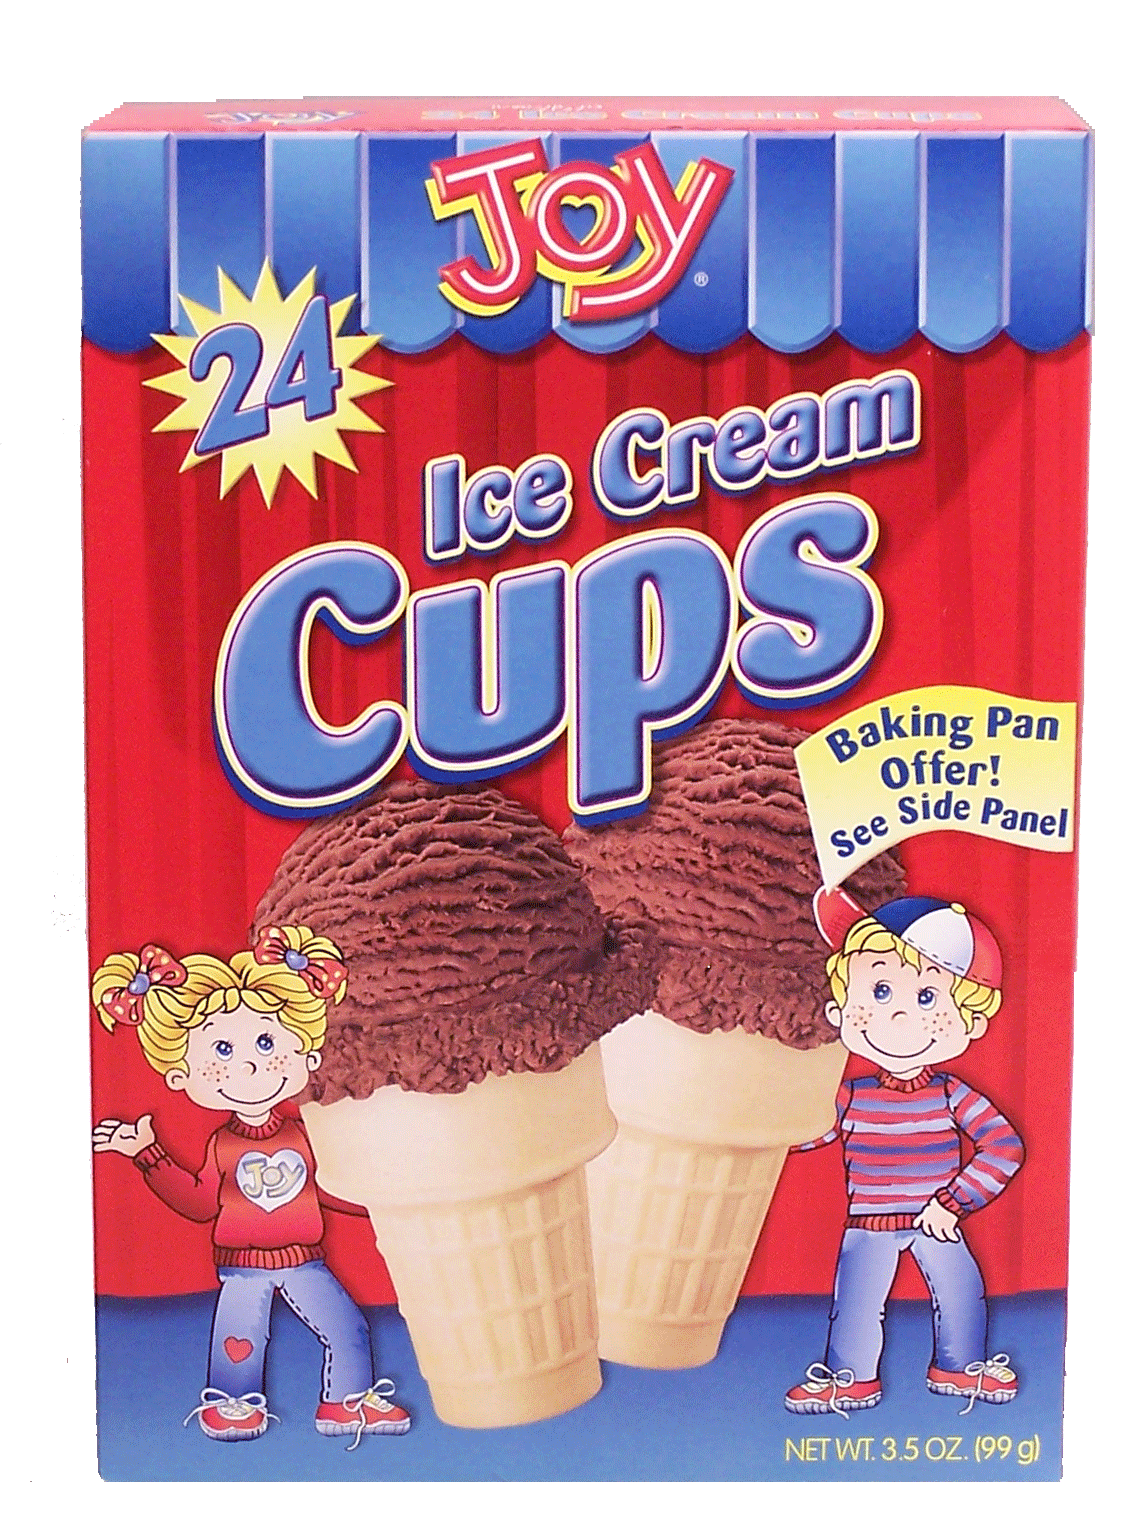 Joy  ice cream cups, 24-count Full-Size Picture